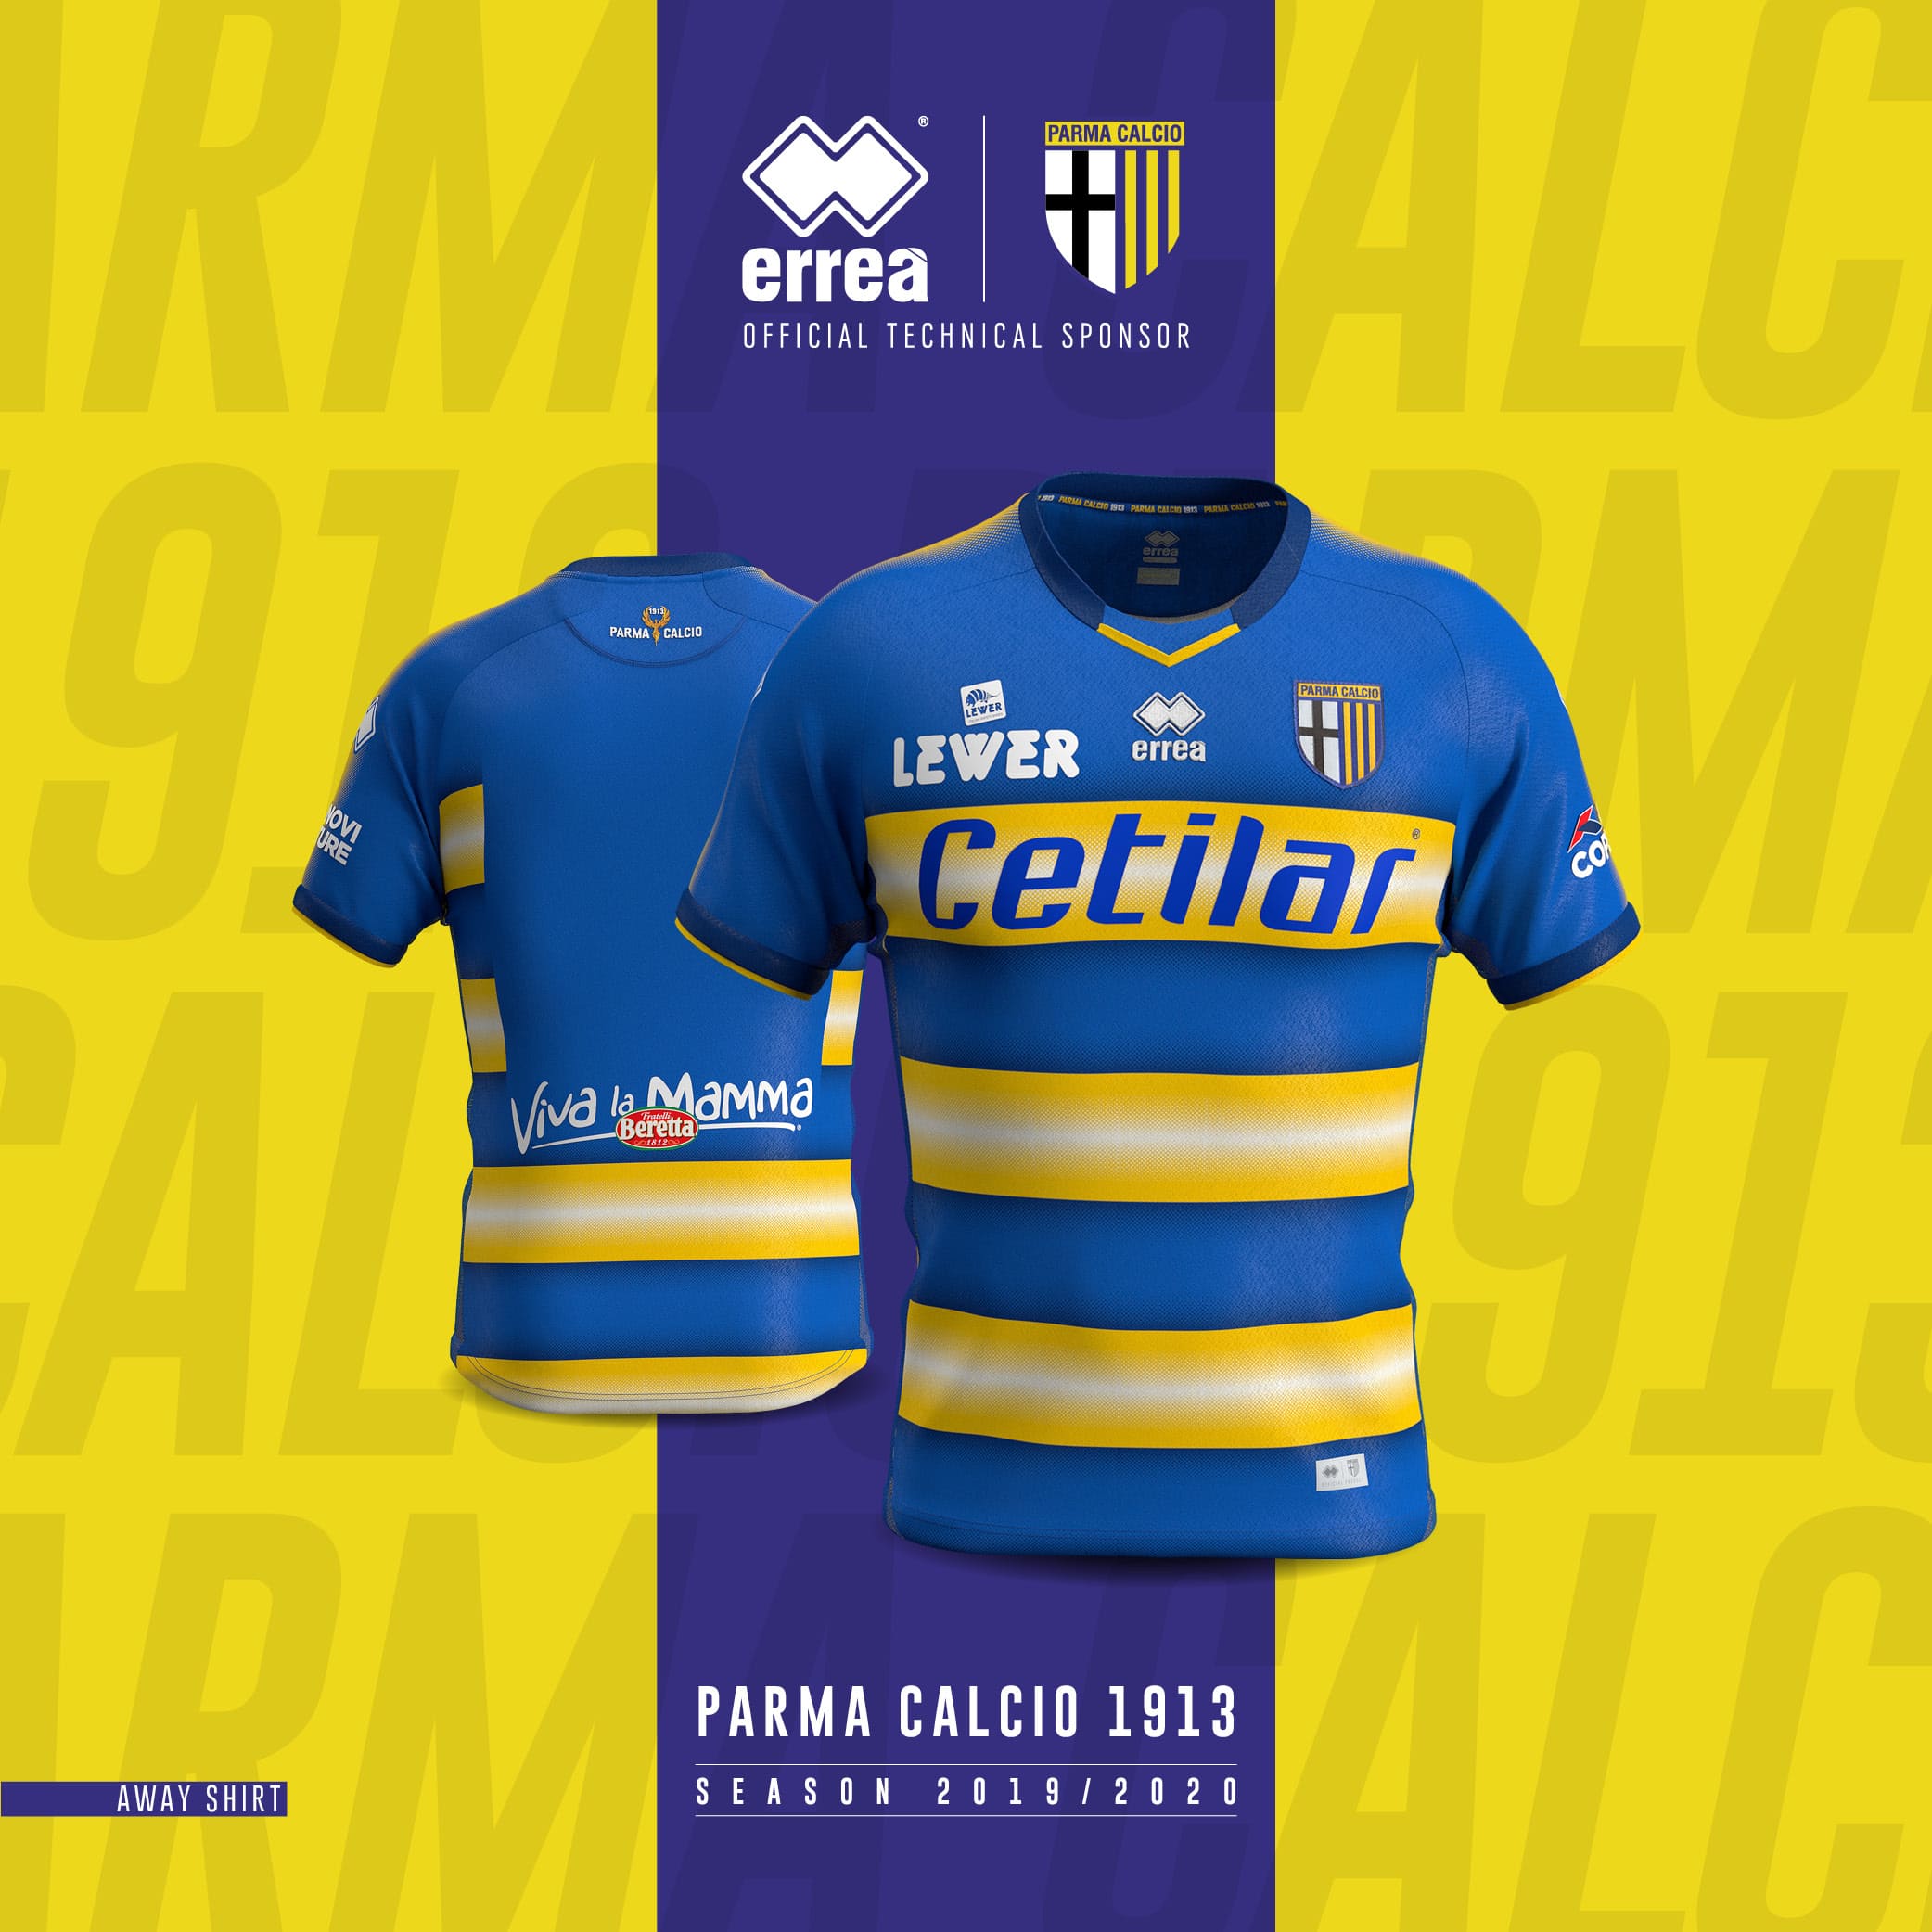 2019/20 away for Parma Calcio 1913 is unveiled!